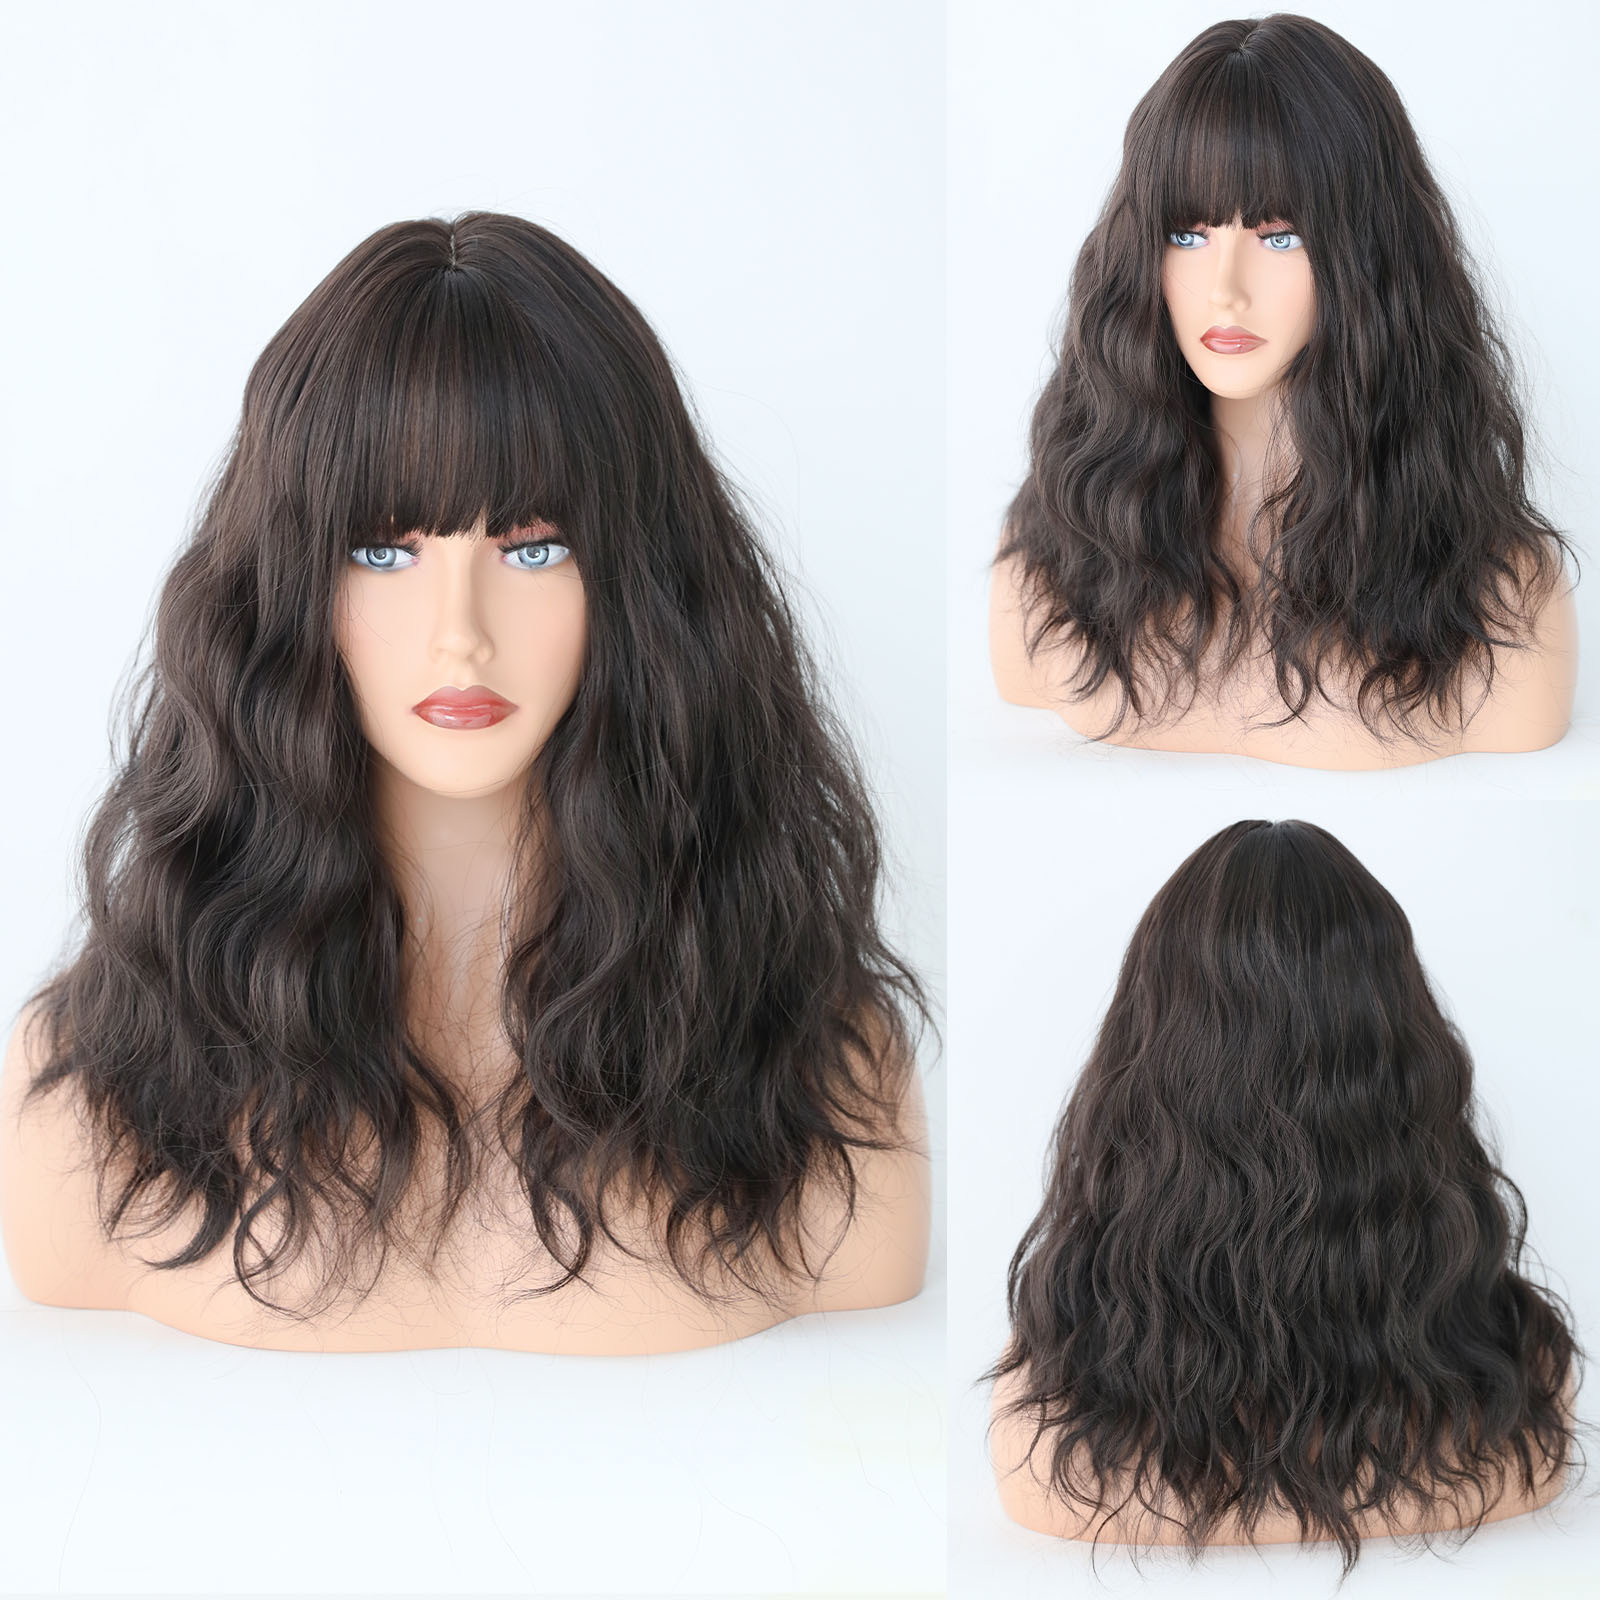 An easy-to-wear synthetic wig in female haze blue, featuring stylish wavy medium-length hair for a chic look